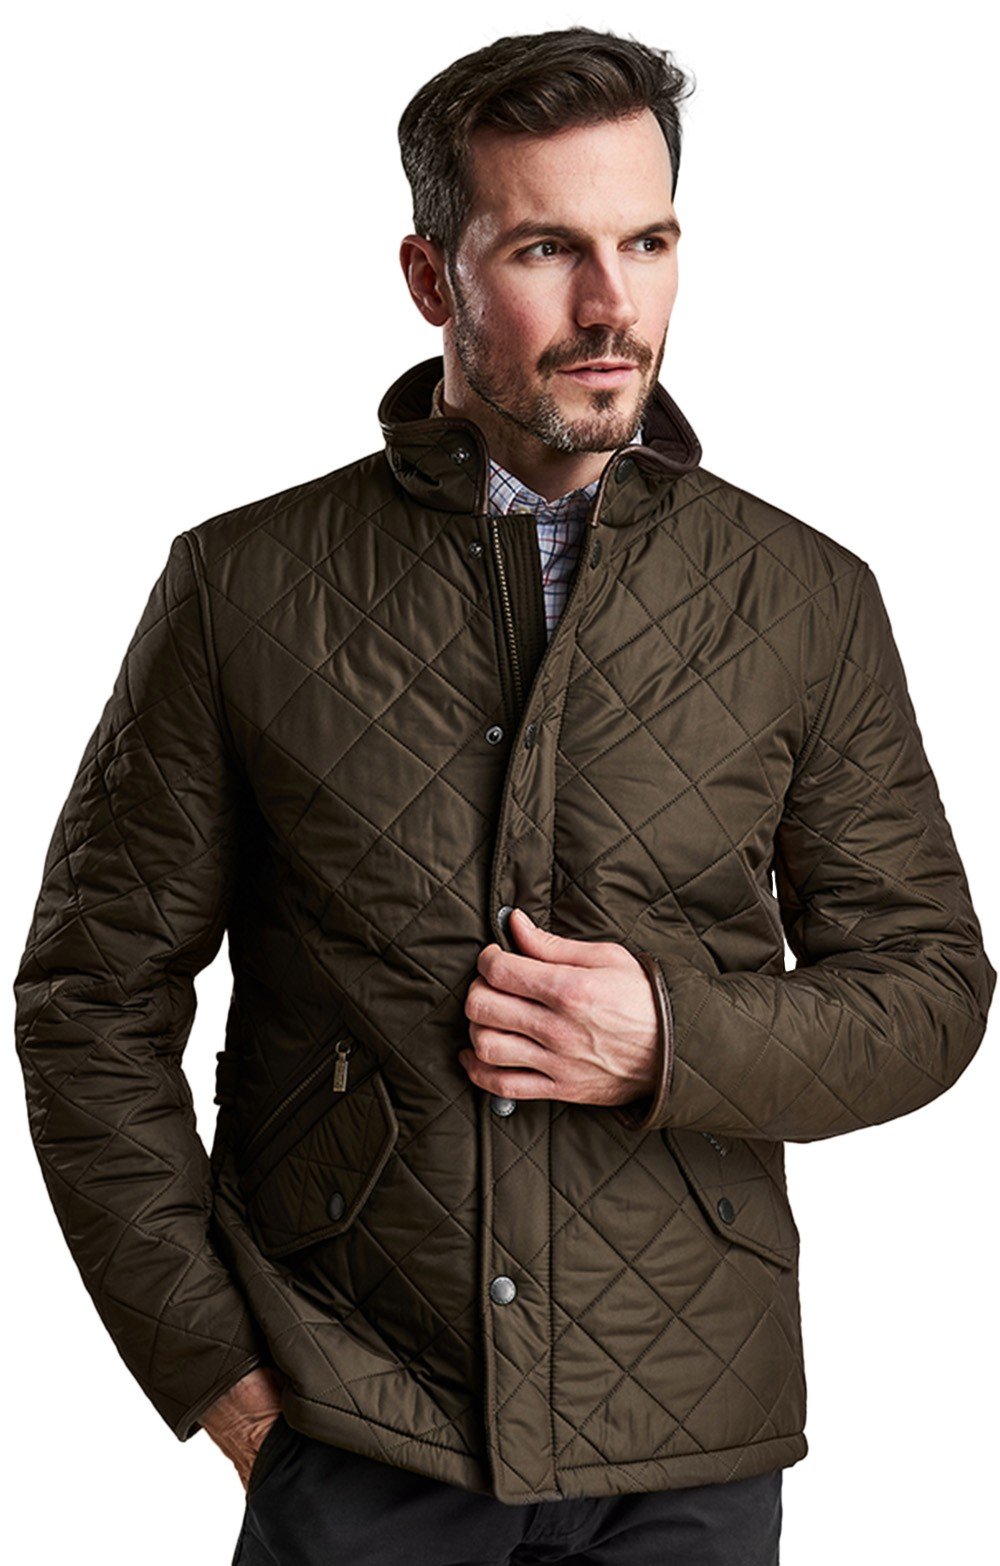 mens barbour style quilted jacket